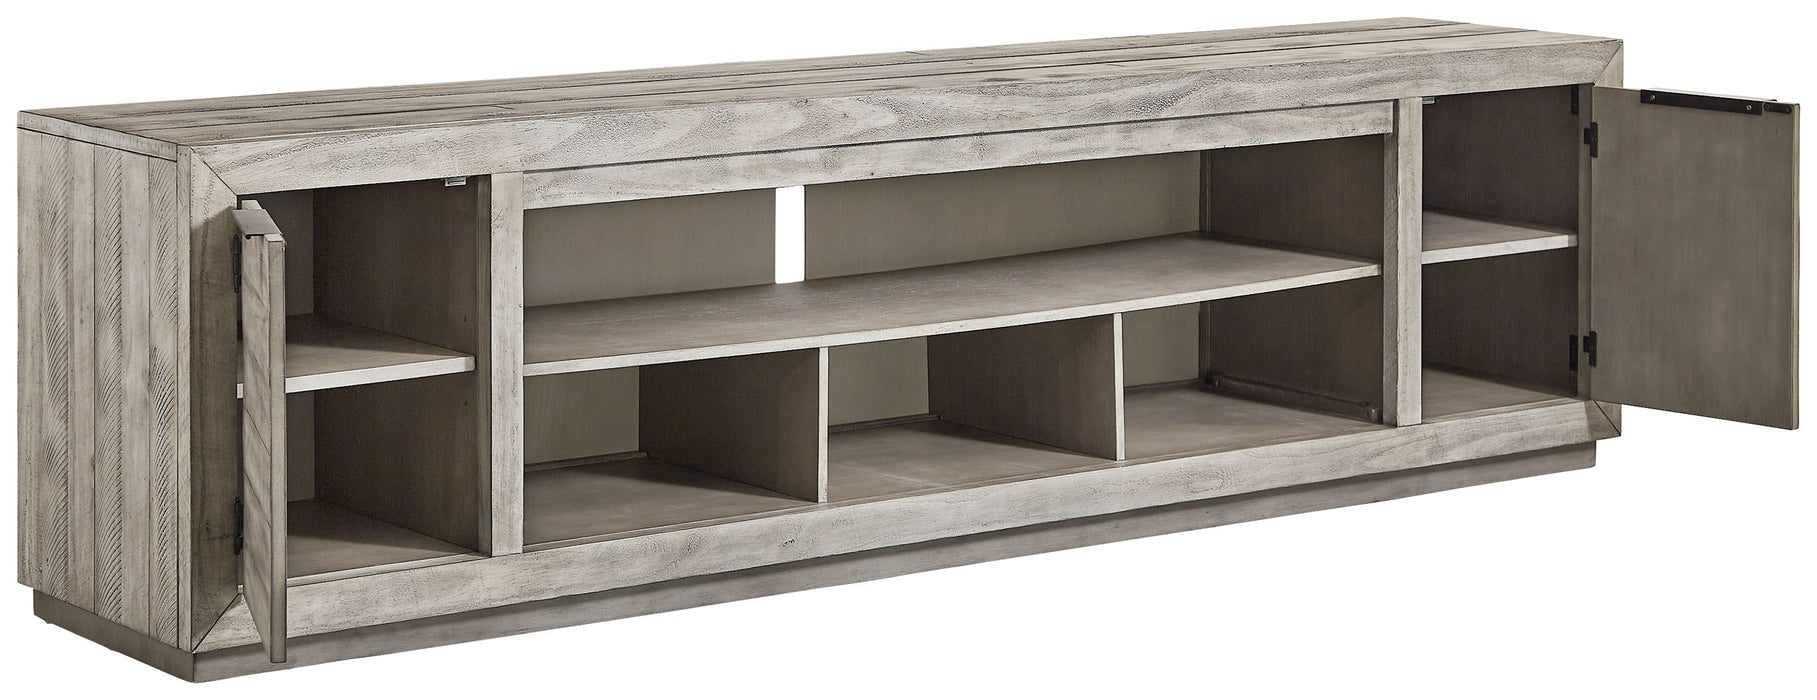 Naydell - Gray - Xl TV Stand W/Fireplace Option Unique Piece Furniture